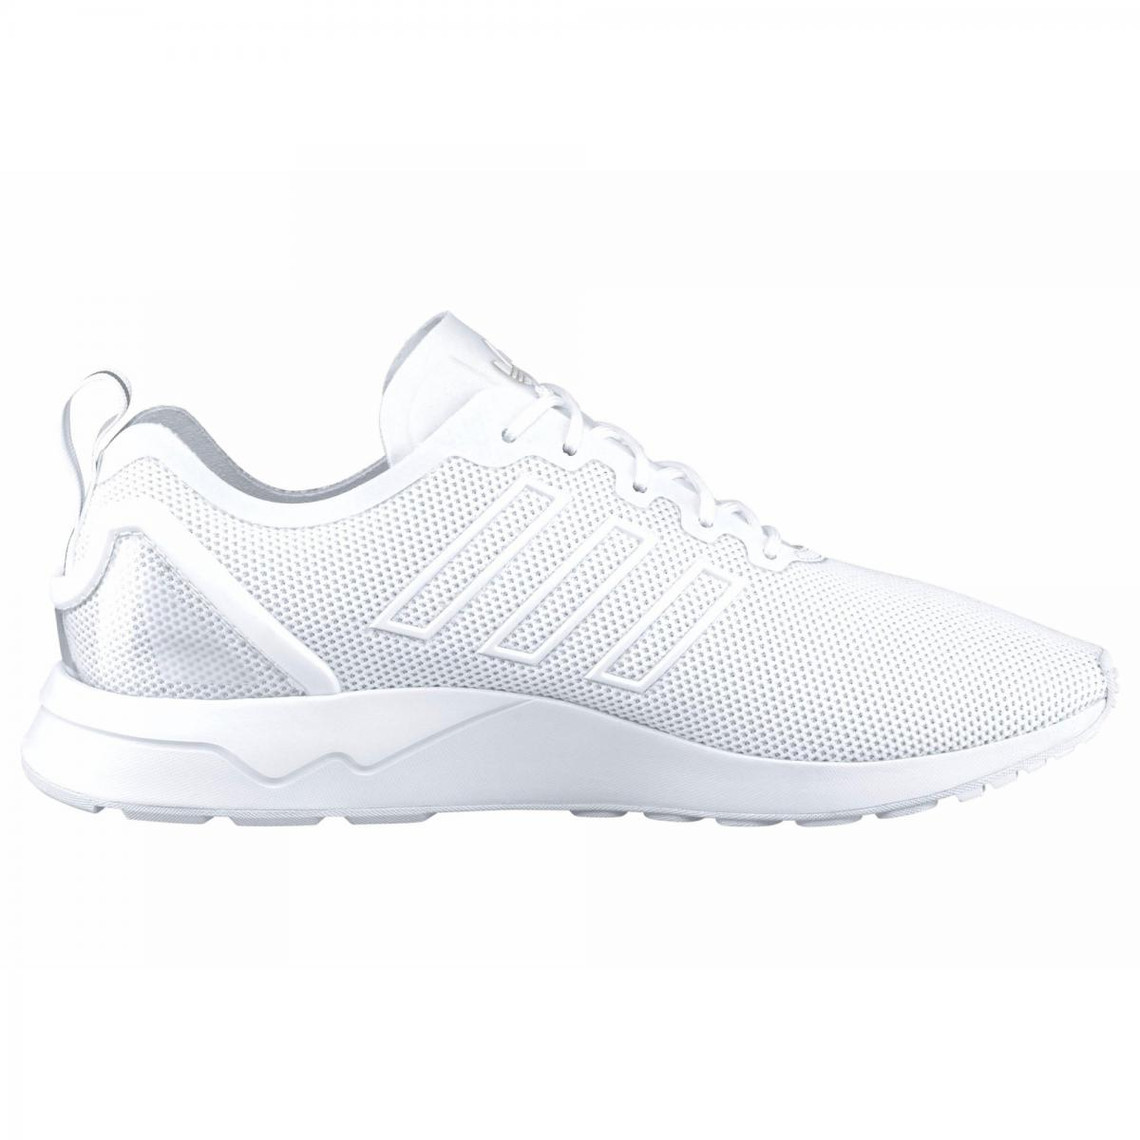 adidas sneakers homme blanc